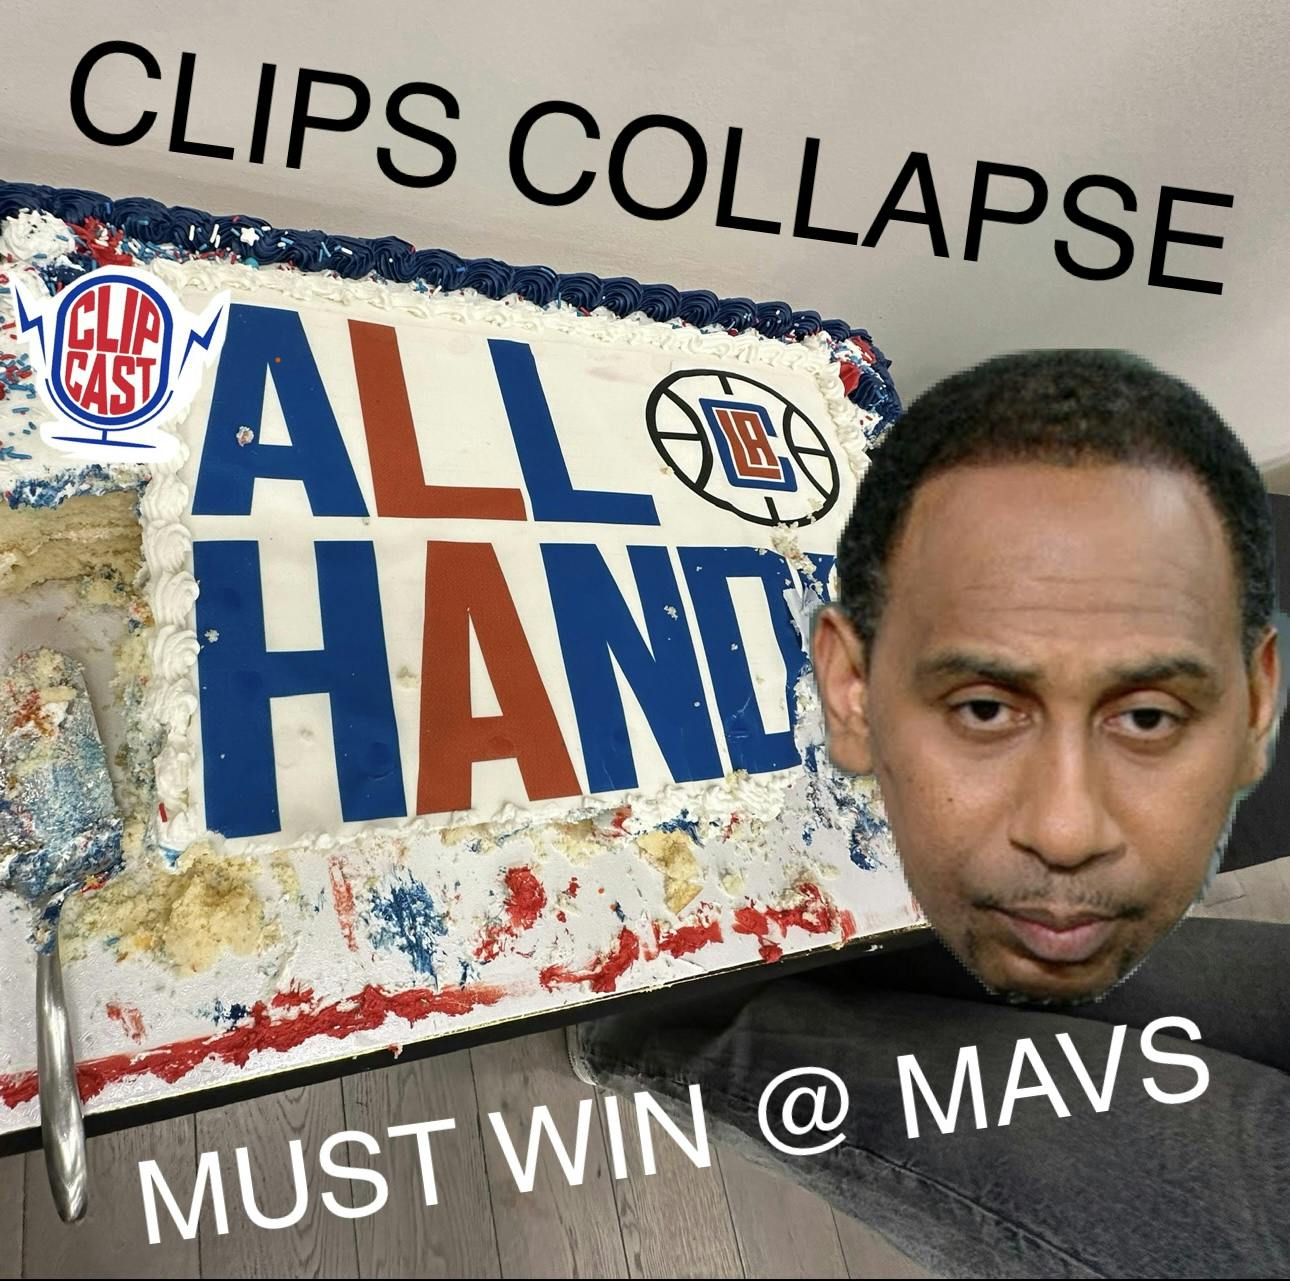 CLIPS COLLAPSE MUST WIN @ MAVS